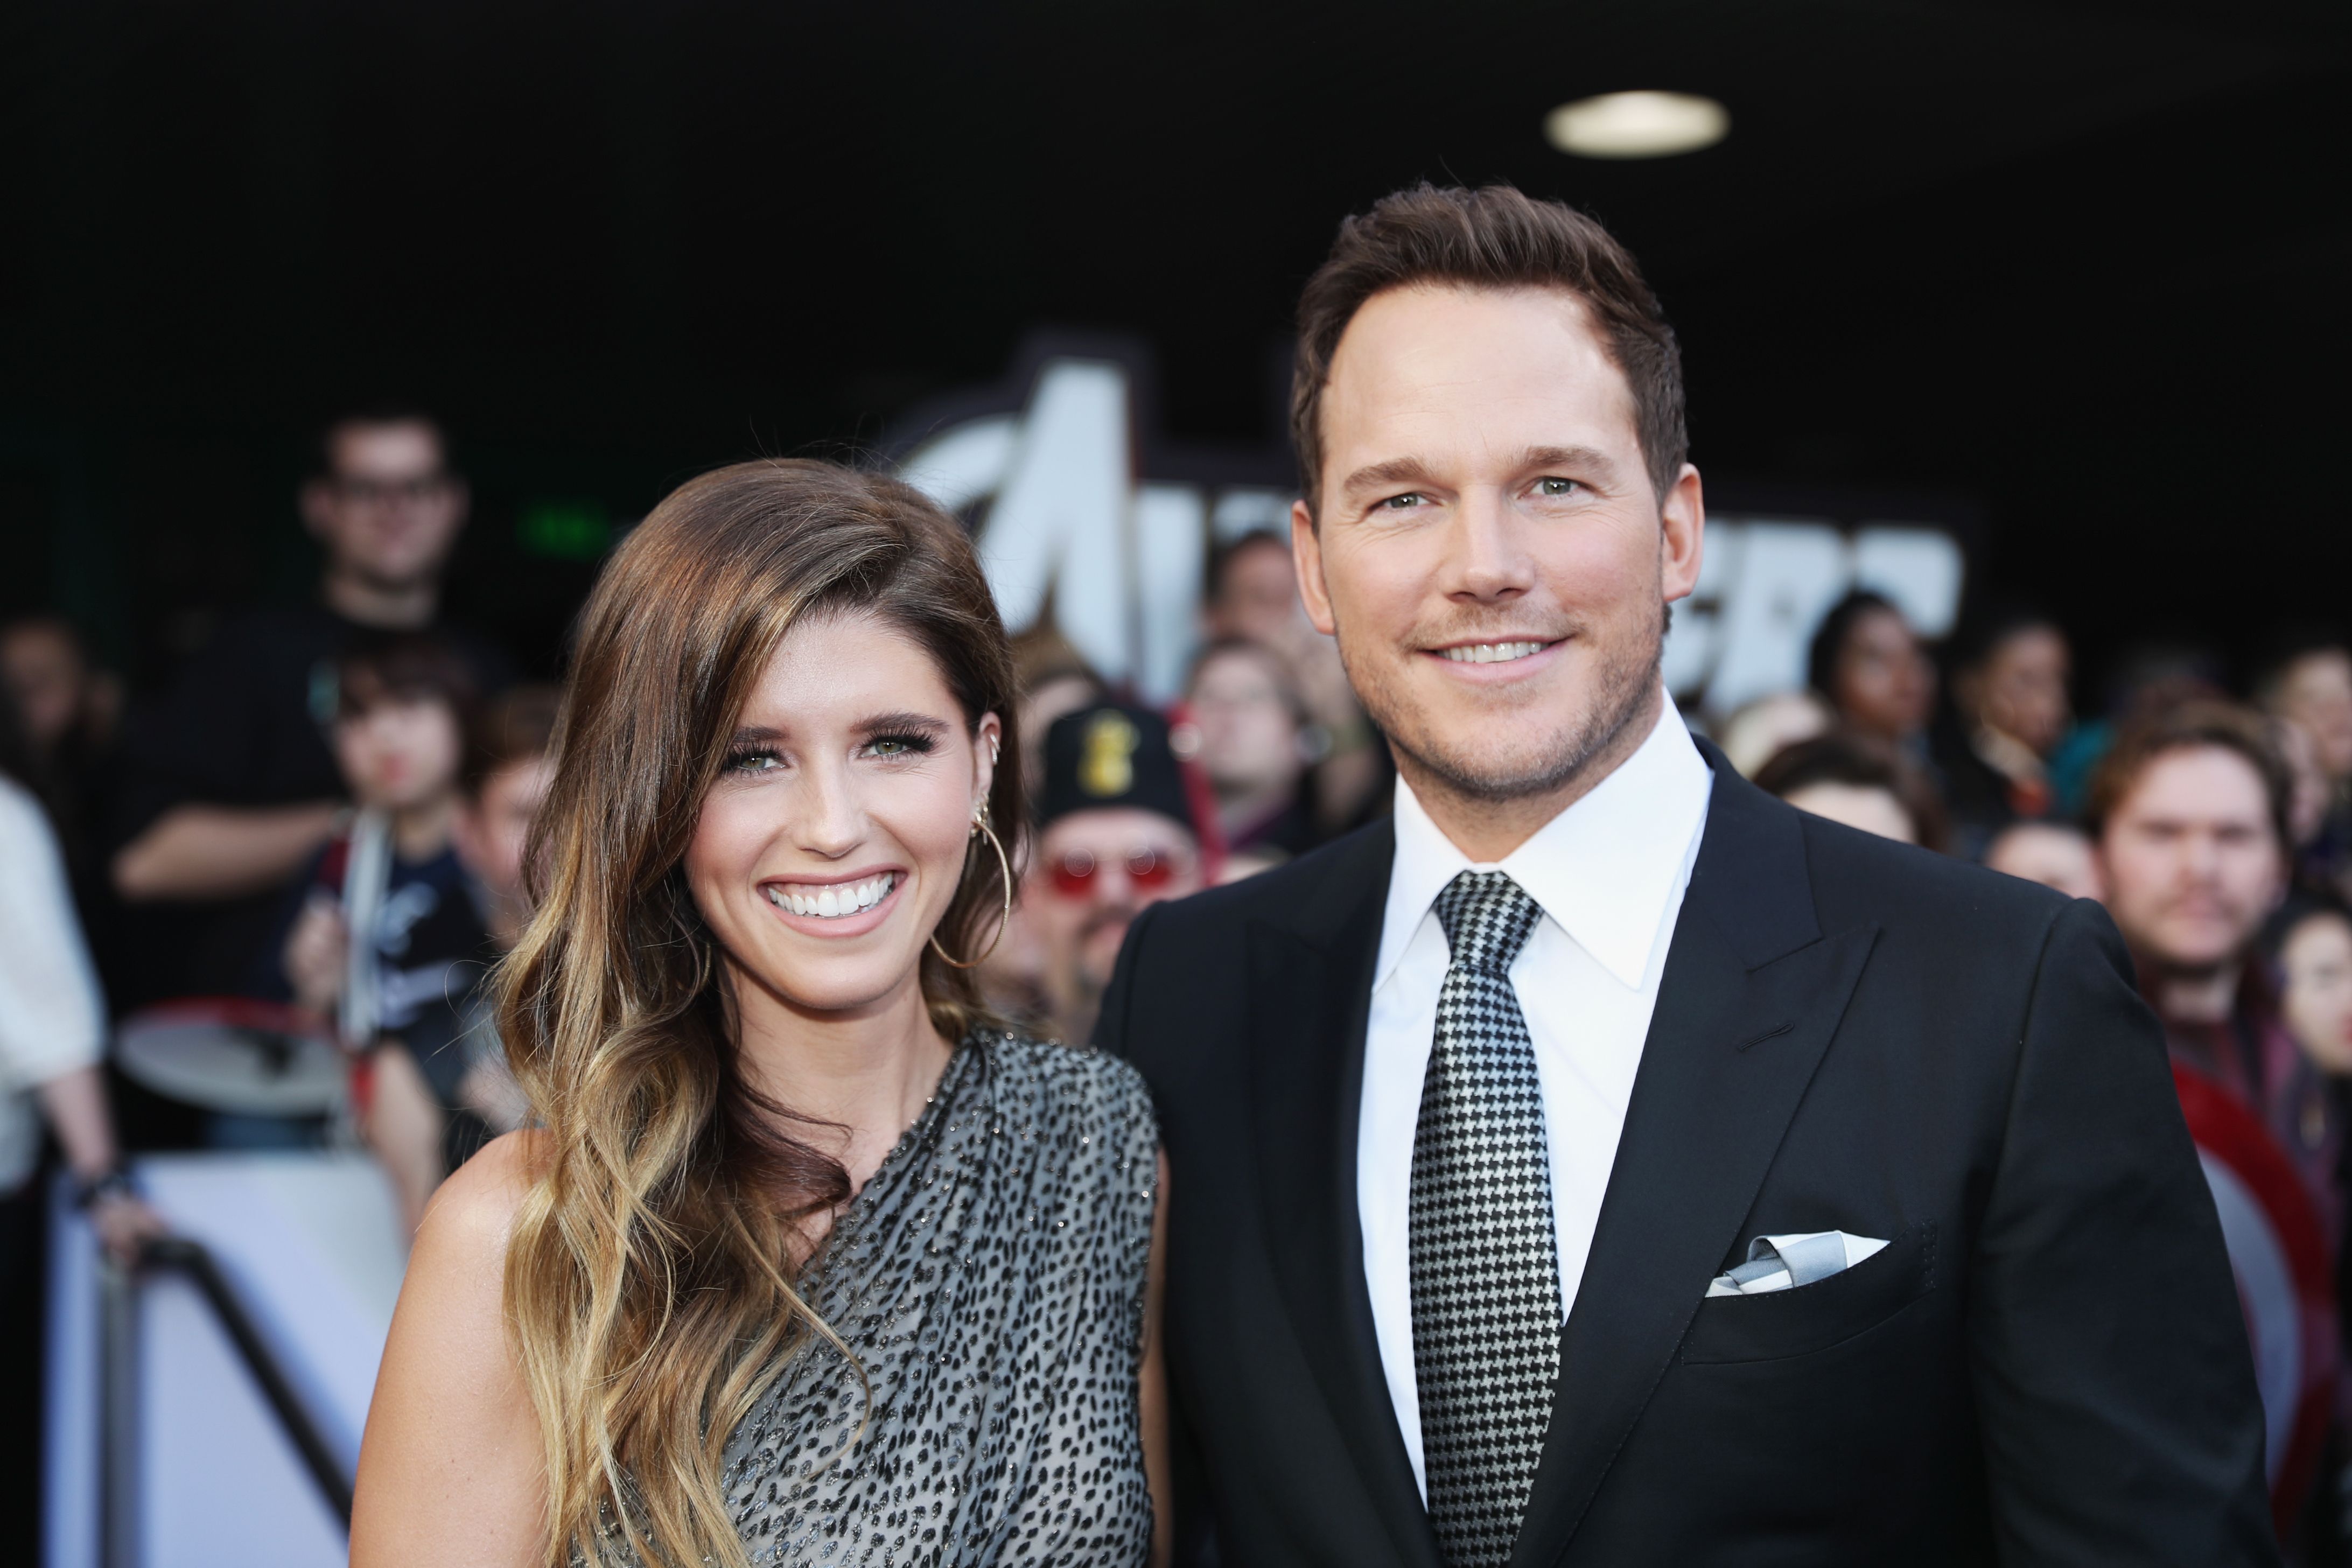 Katherine Schwarzenegger and Chris Pratt during the Los Angeles World Premiere of Marvel Studios' "Avengers: Endgame" at the Los Angeles Convention Center on April 23, 2019 in Los Angeles, California | Source: Getty Images